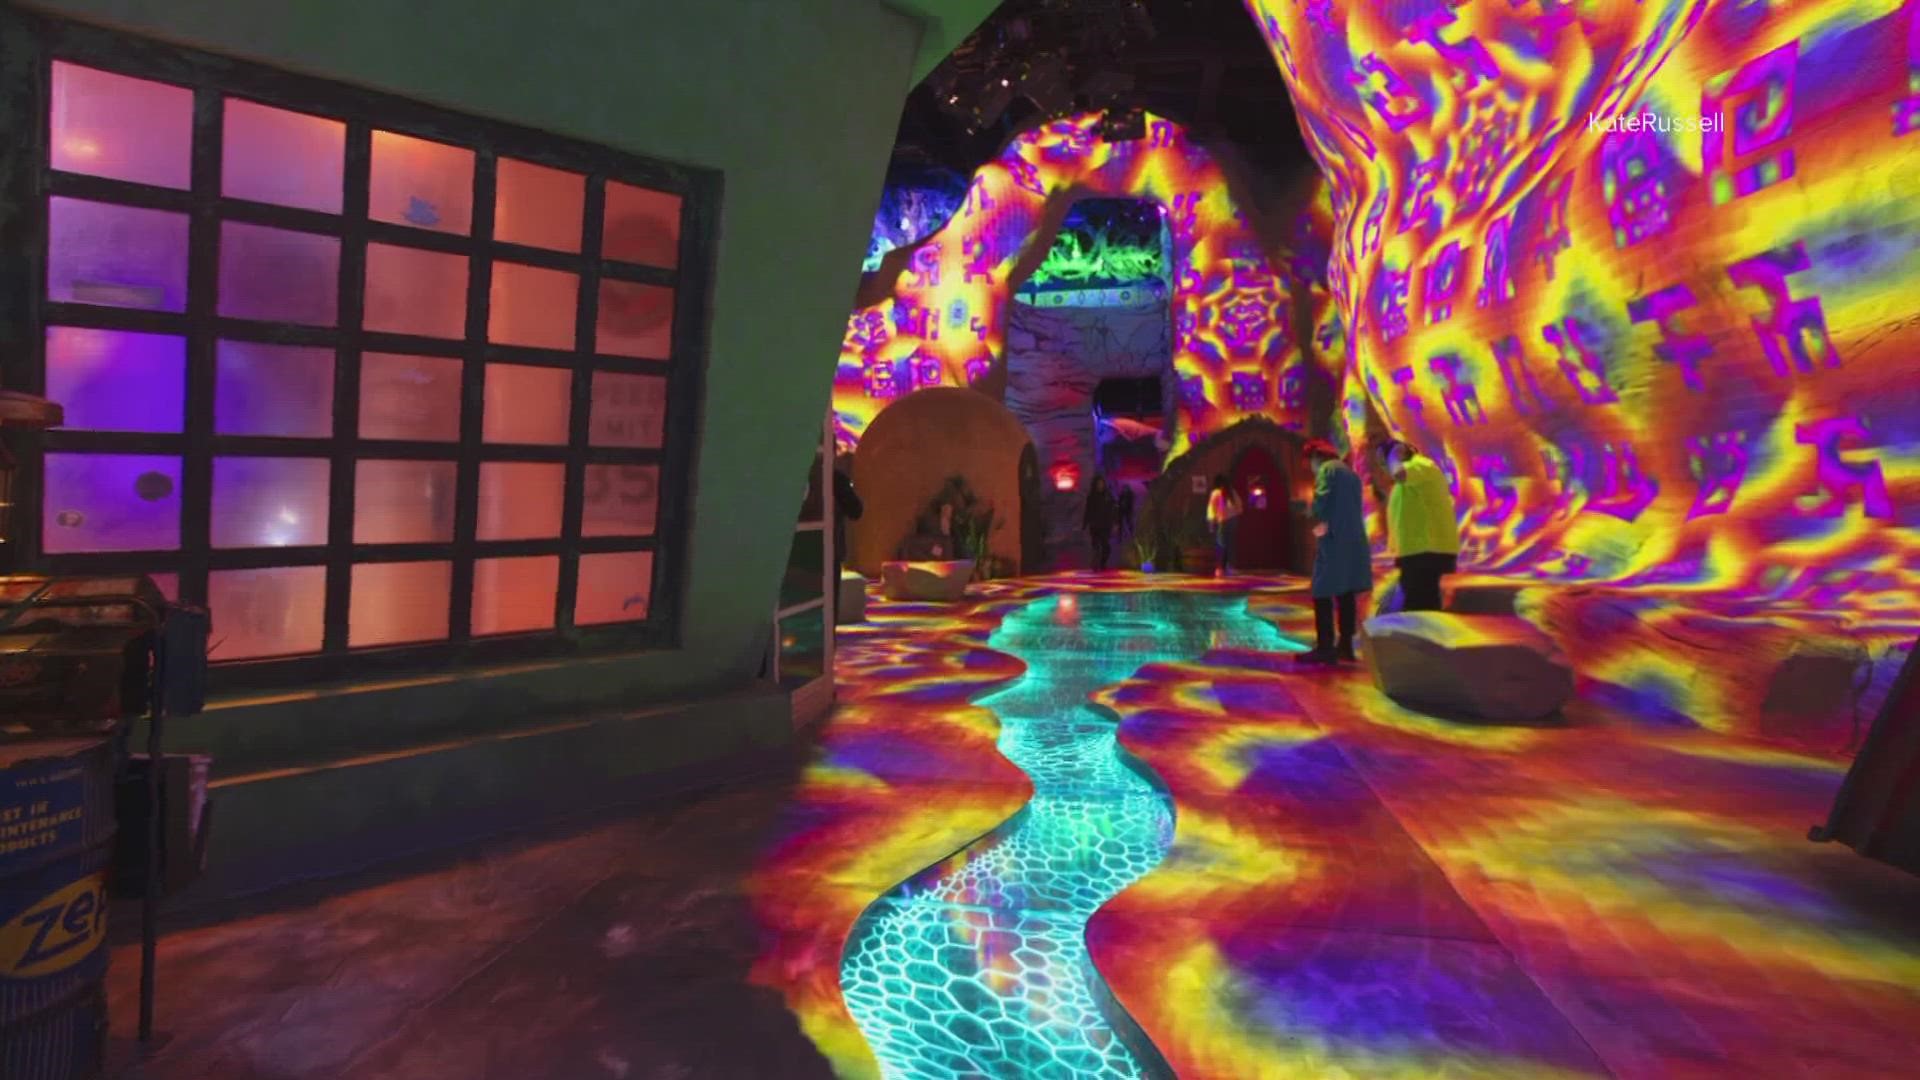 Meow Wolf is known for its immersive and interactive experiences aimed at transporting audiences of all ages into fantastical realms of story and exploration.